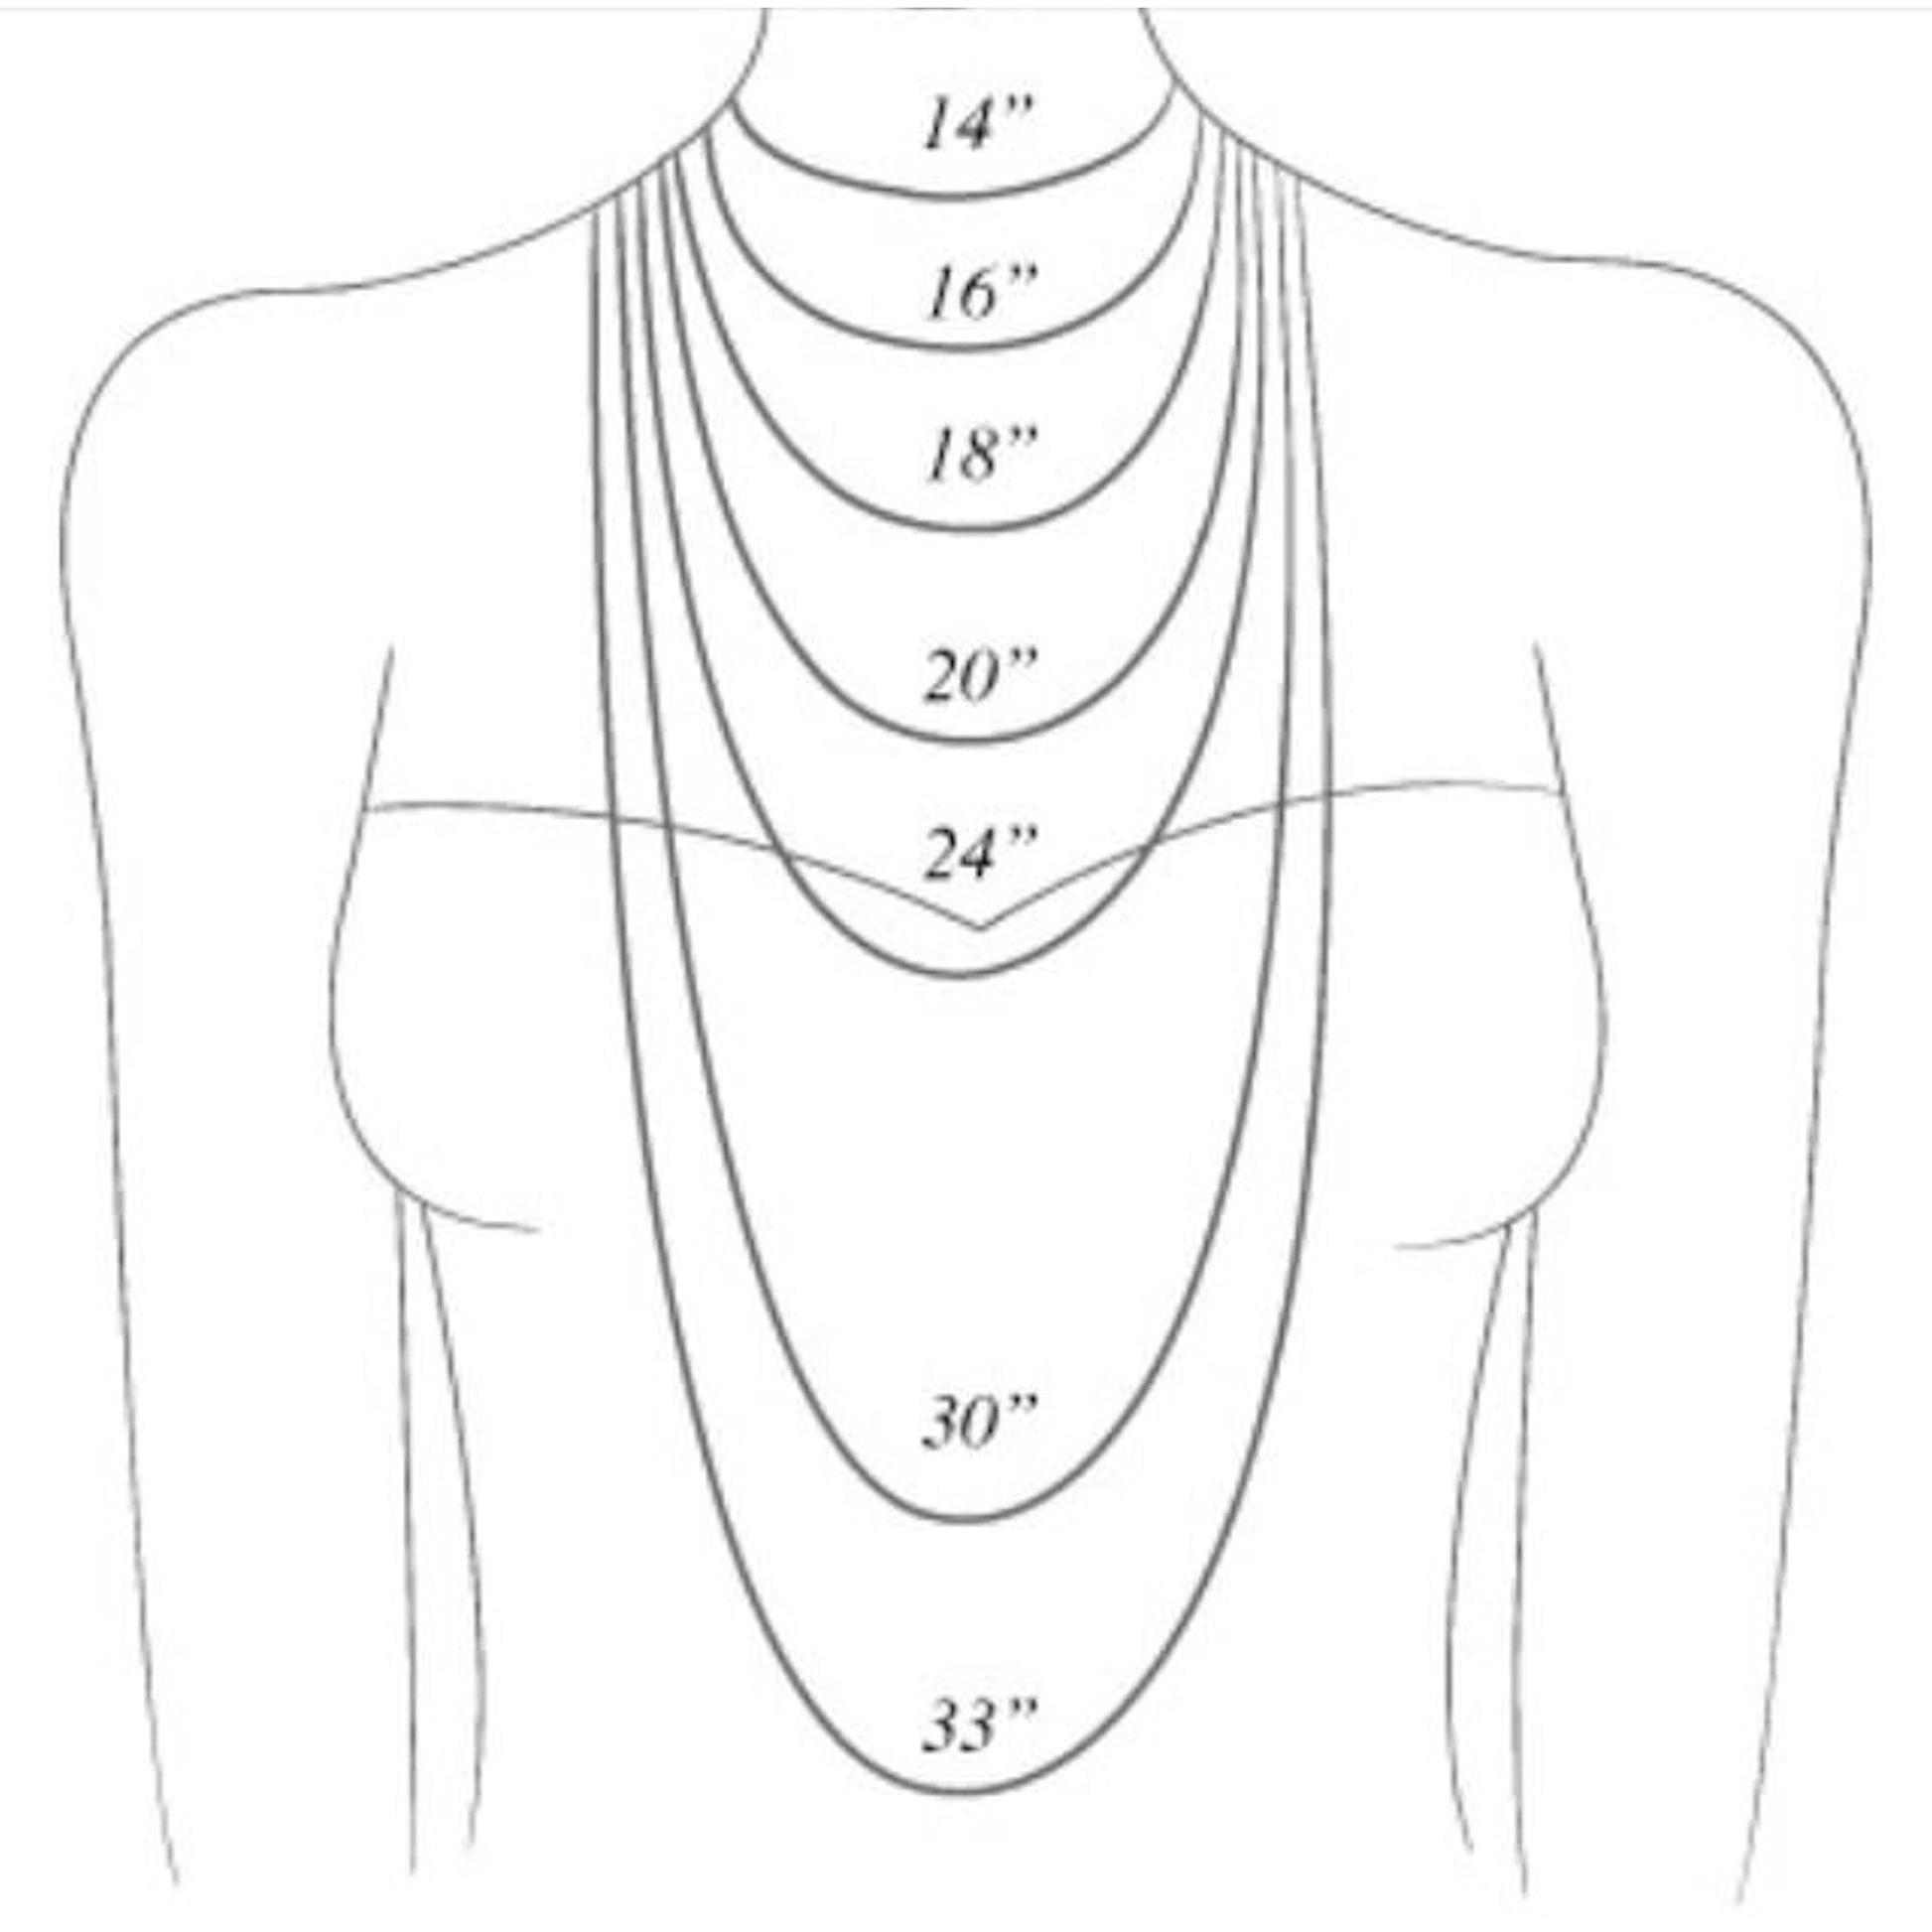 Different necklace lengths  shown on model